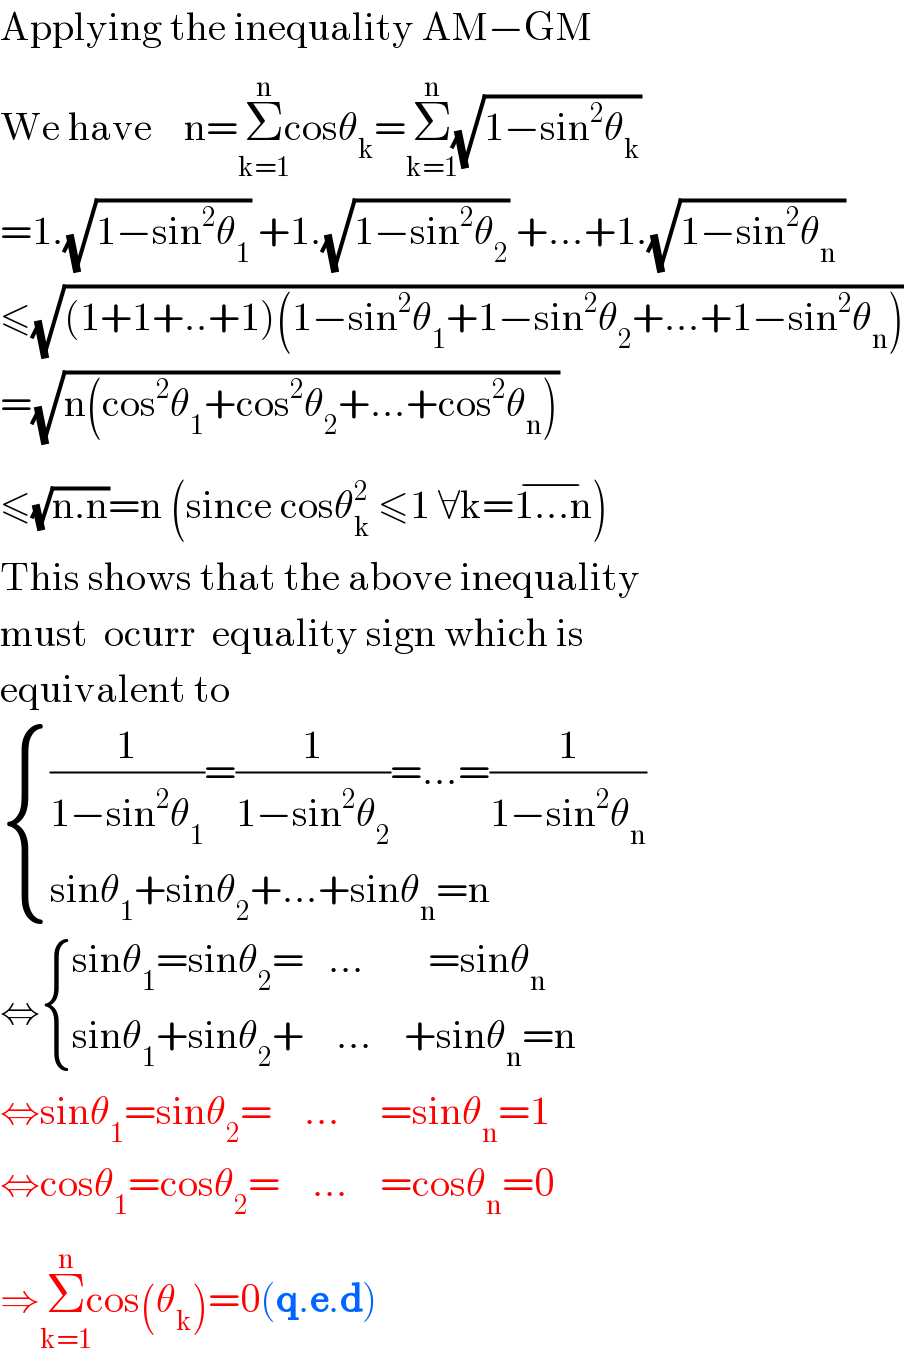 Applying the inequality AM−GM  We have    n=Σ_(k=1) ^(n) cosθ_k =Σ_(k=1) ^(n) (√(1−sin^2 θ_k ))  =1.(√(1−sin^2 θ_1 )) +1.(√(1−sin^2 θ_2 )) +...+1.(√(1−sin^2 θ_n  ))  ≤(√((1+1+..+1)(1−sin^2 θ_1 +1−sin^2 θ_2 +...+1−sin^2 θ_n )))  =(√(n(cos^2 θ_1 +cos^2 θ_2 +...+cos^2 θ_n )))  ≤(√(n.n))=n (since cosθ_k ^2  ≤1 ∀k=1...n^(−) )  This shows that the above inequality  must  ocurr  equality sign which is  equivalent to   { (((1/(1−sin^2 θ_1 ))=(1/(1−sin^2 θ_2 ))=...=(1/(1−sin^2 θ_n )))),((sinθ_1 +sinθ_2 +...+sinθ_n =n)) :}  ⇔ { ((sinθ_1 =sinθ_2 =   ...        =sinθ_n )),((sinθ_1 +sinθ_2 +    ...    +sinθ_n =n)) :}  ⇔sinθ_1 =sinθ_2 =    ...     =sinθ_n =1  ⇔cosθ_1 =cosθ_2 =    ...    =cosθ_n =0  ⇒Σ_(k=1) ^(n) cos(θ_k )=0(q.e.d)   